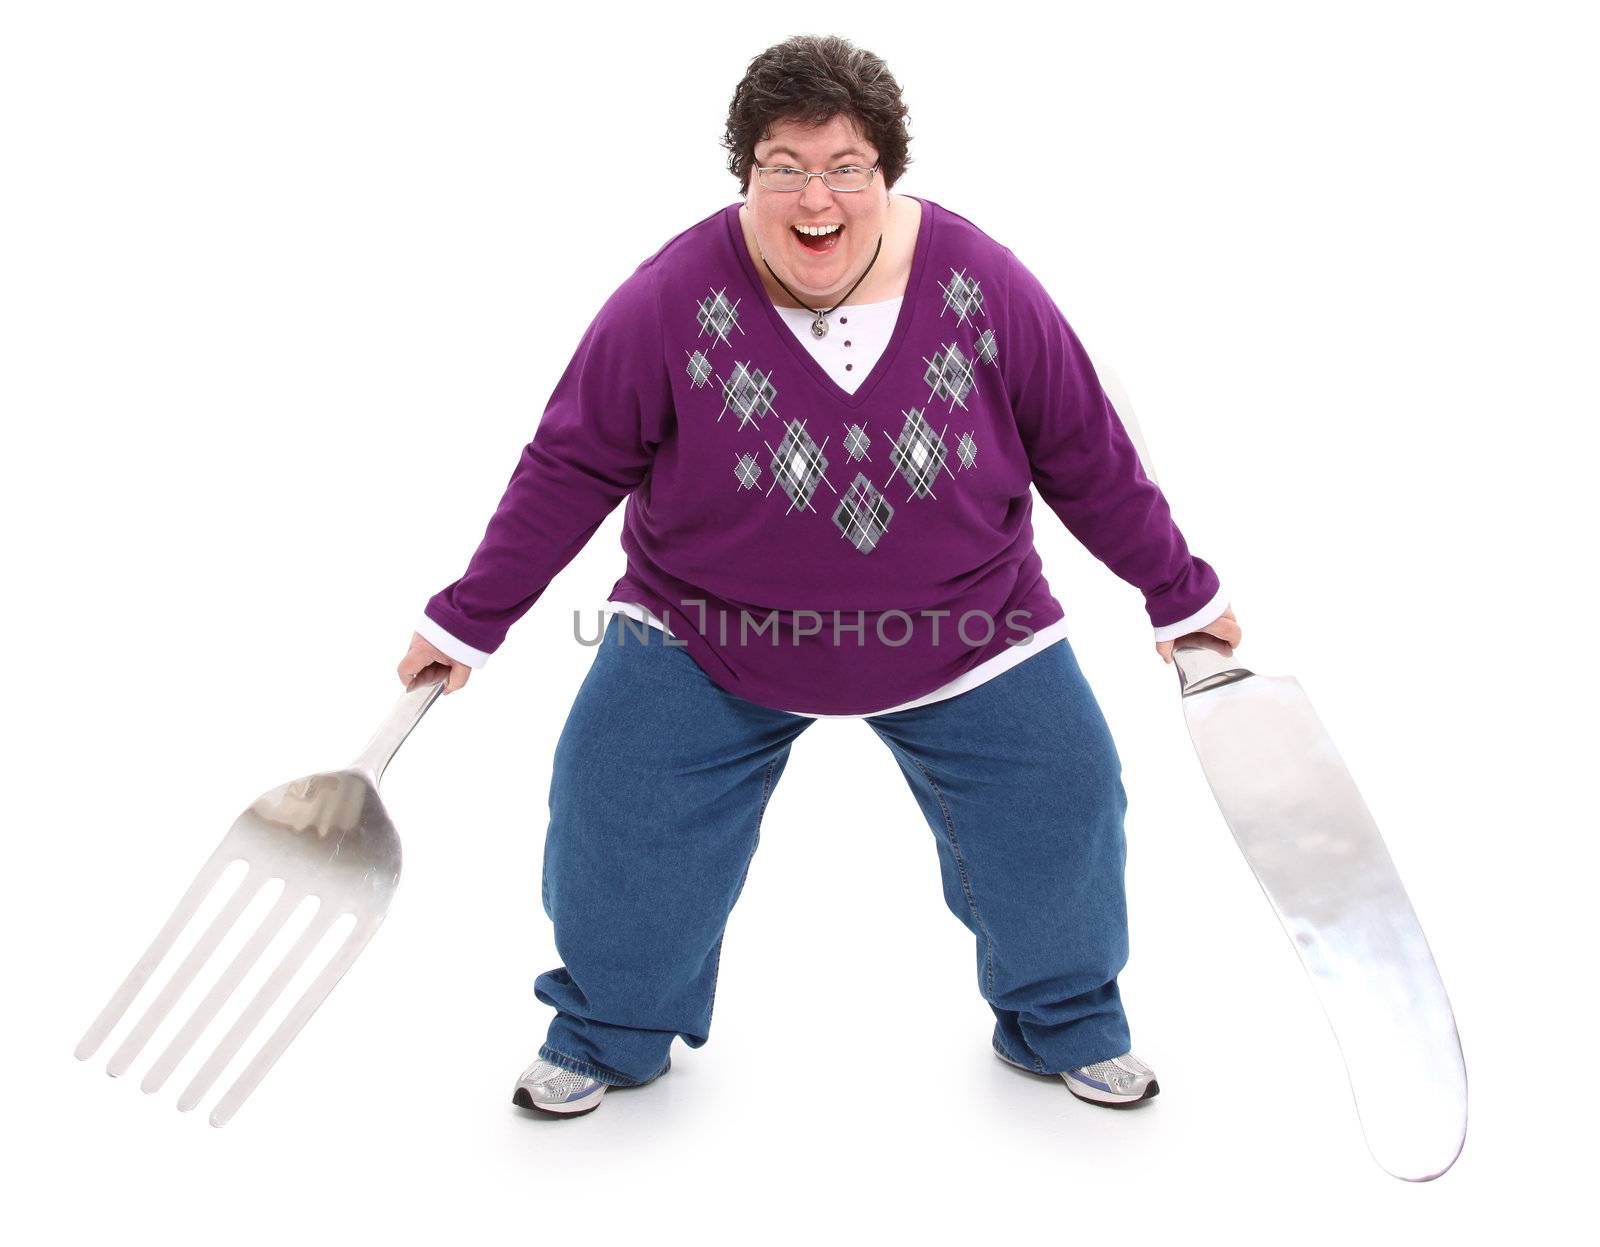 Humor image of excited overweight woman with giant fork and knife over white with clipping path.